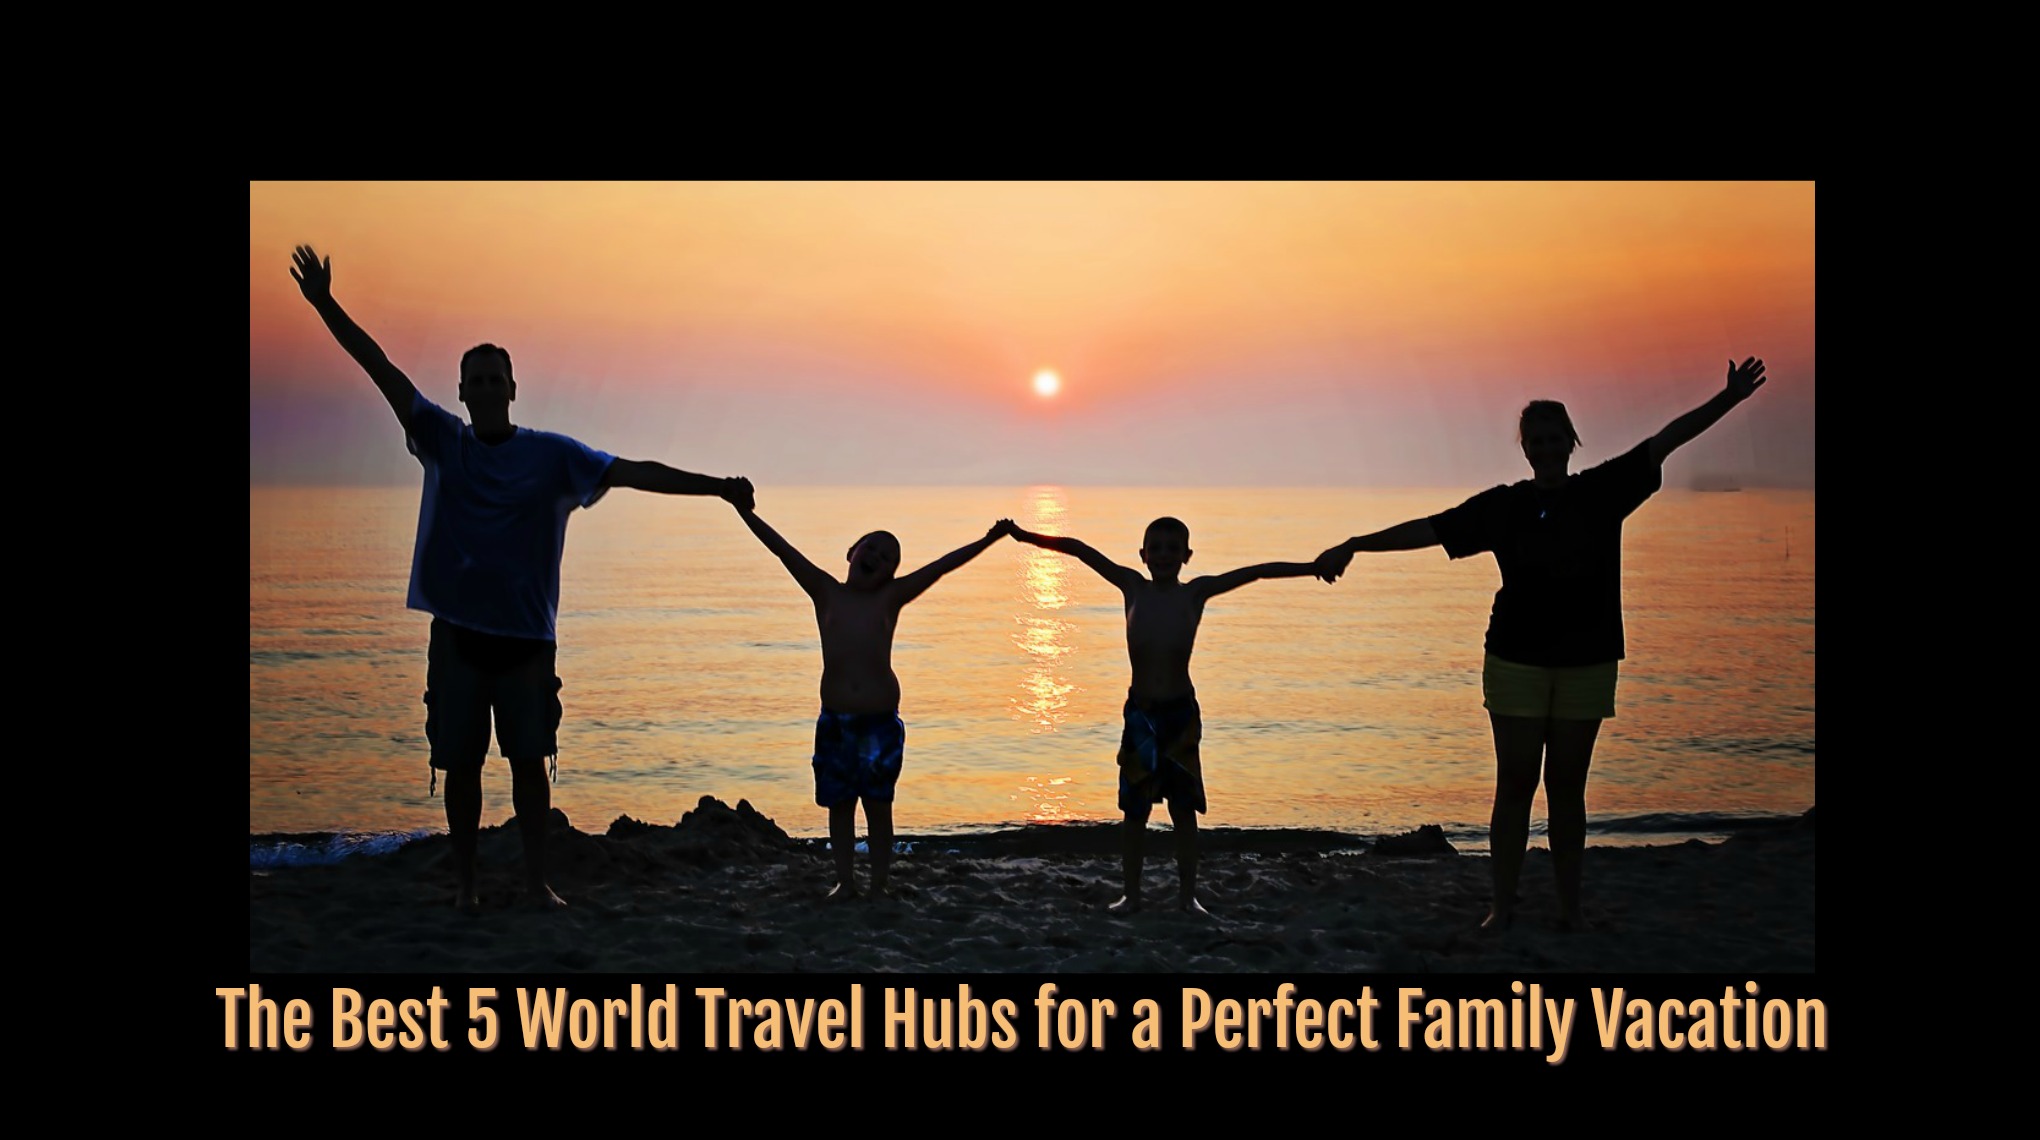 The Best 5 World Travel Hubs for a Perfect Family Vacation